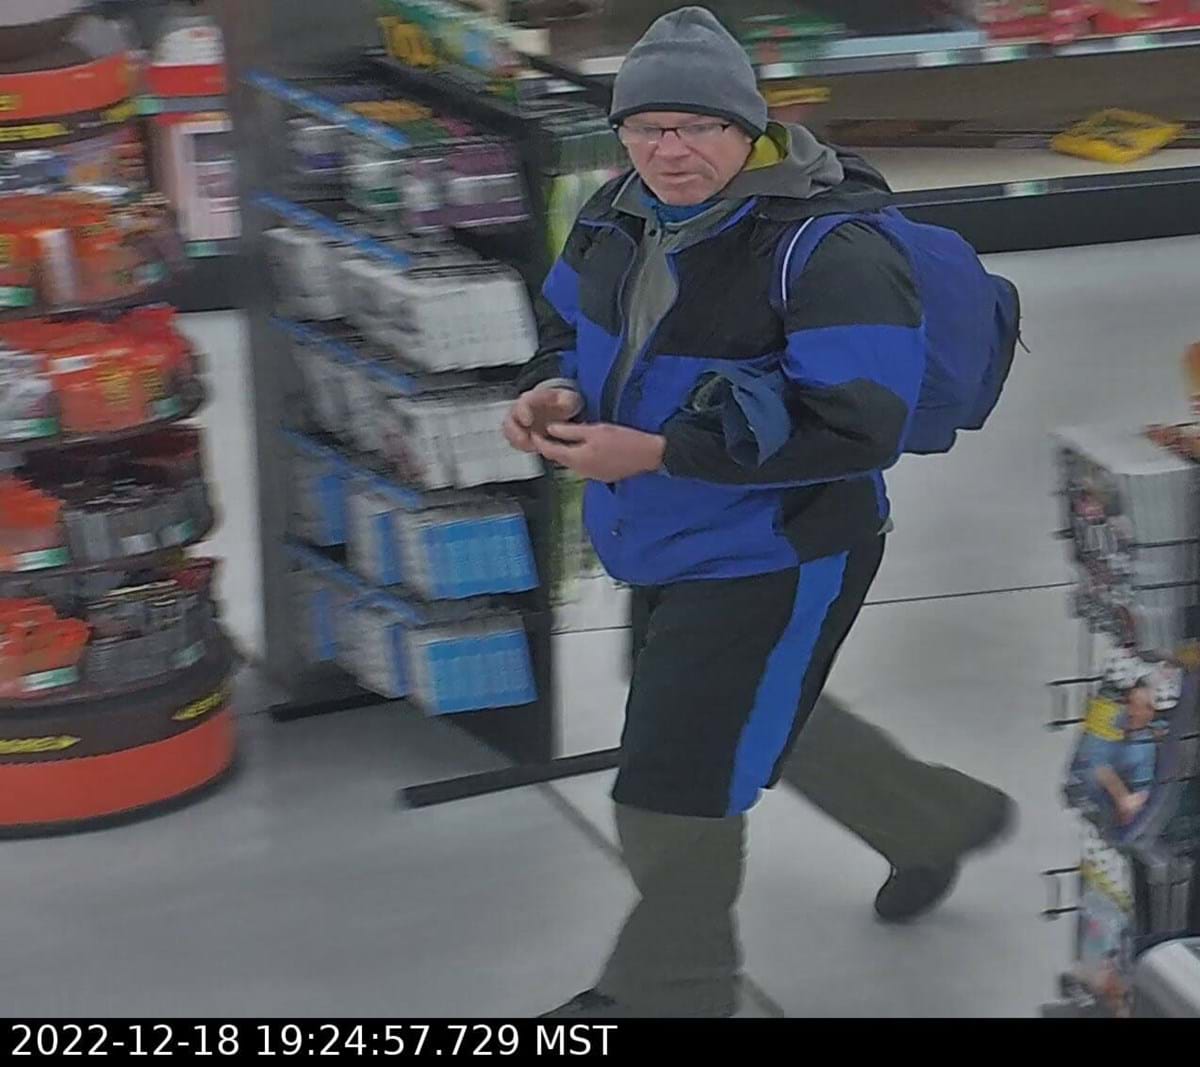 Man with blue and black winter coat on and a beanie walking through a store